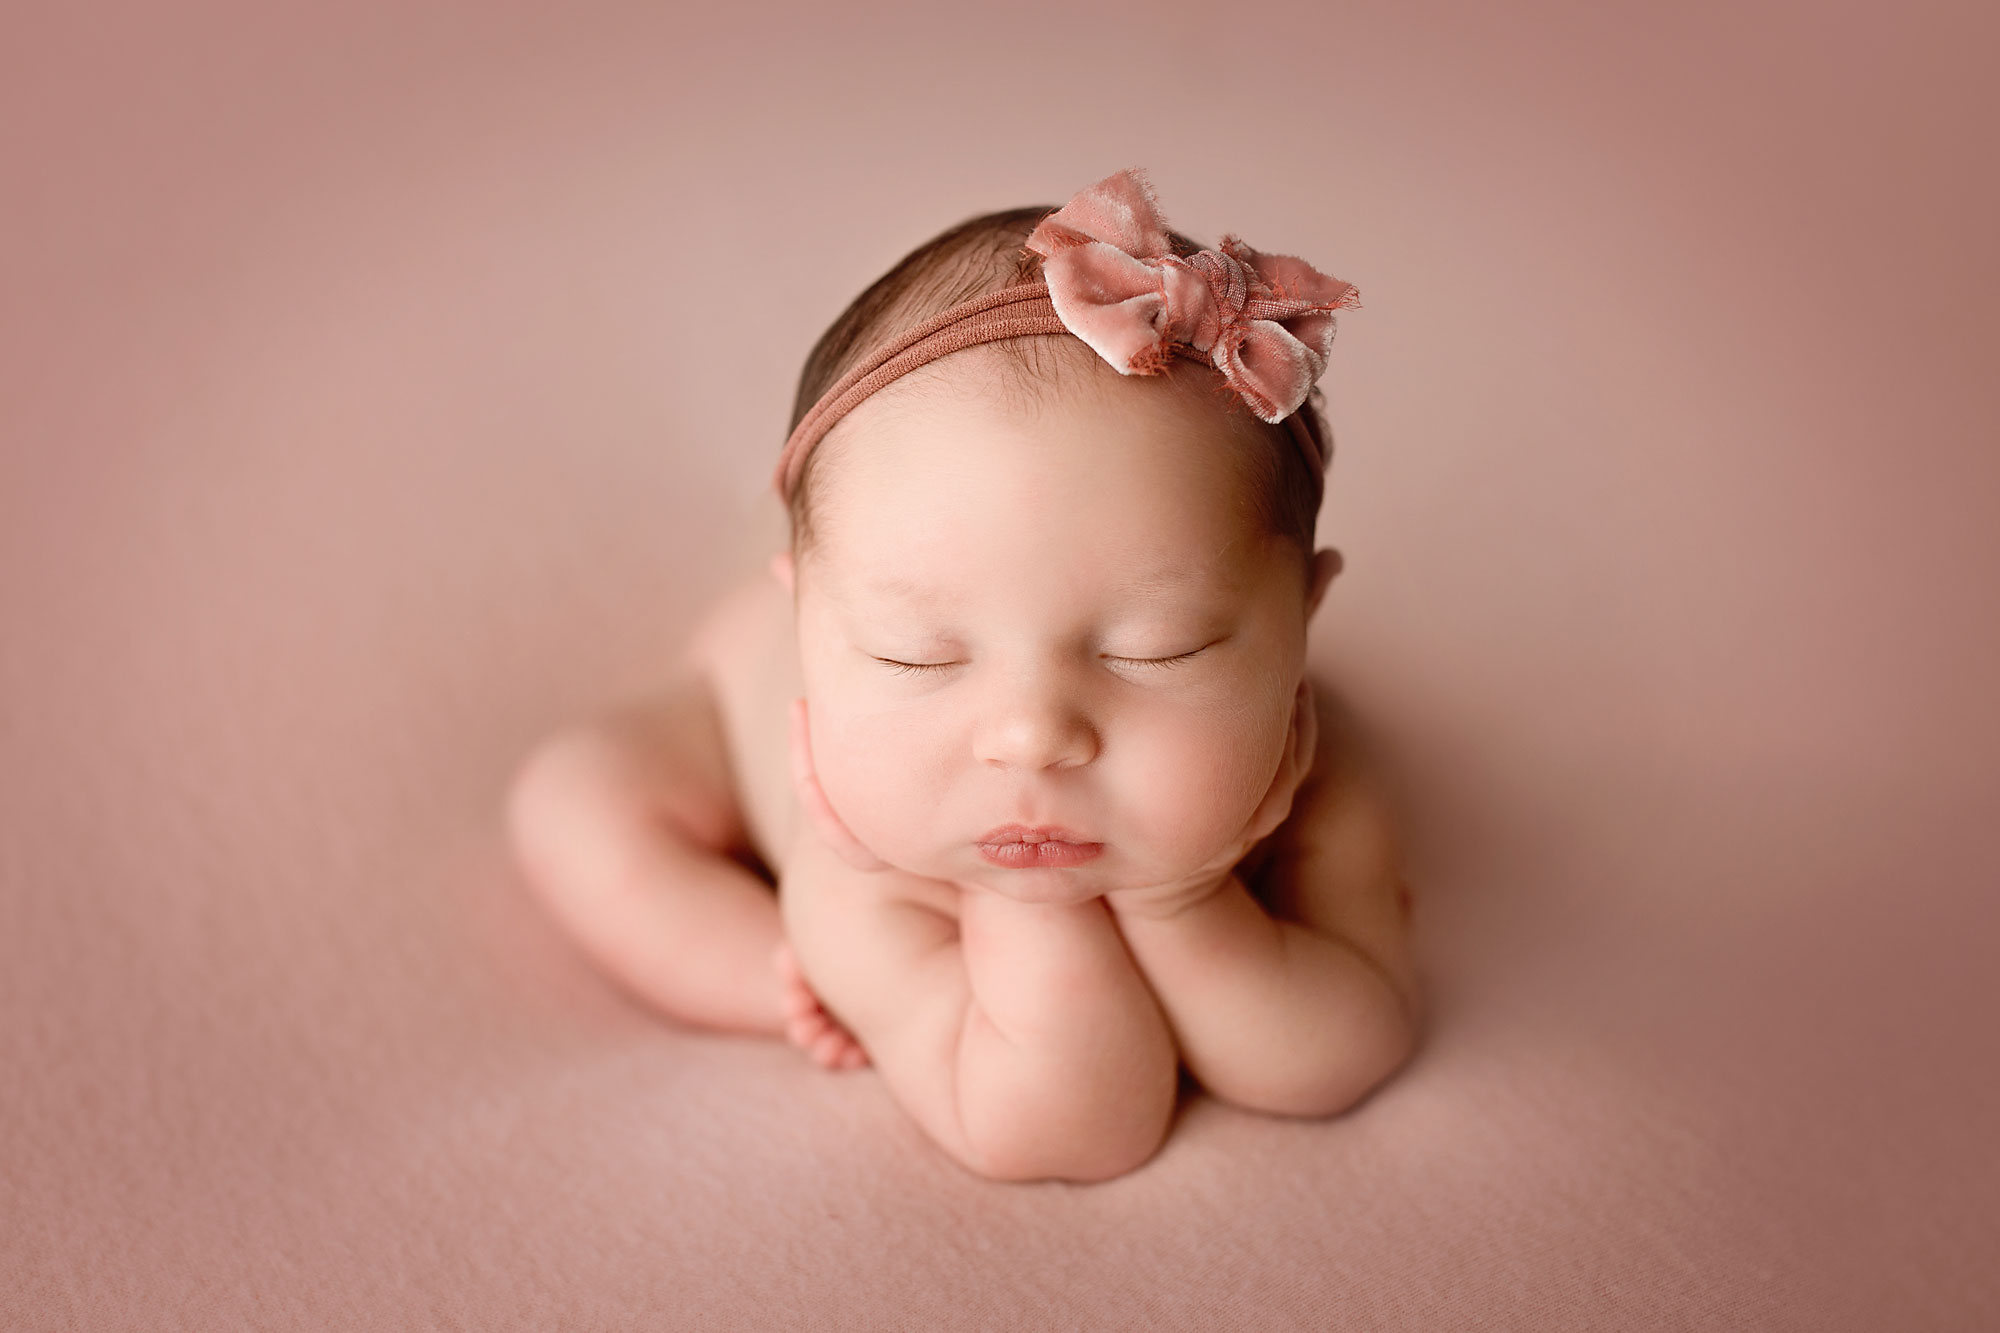 professional newborn photography near middlesex nj, baby girl asleep with chin propped in hands against a pink background